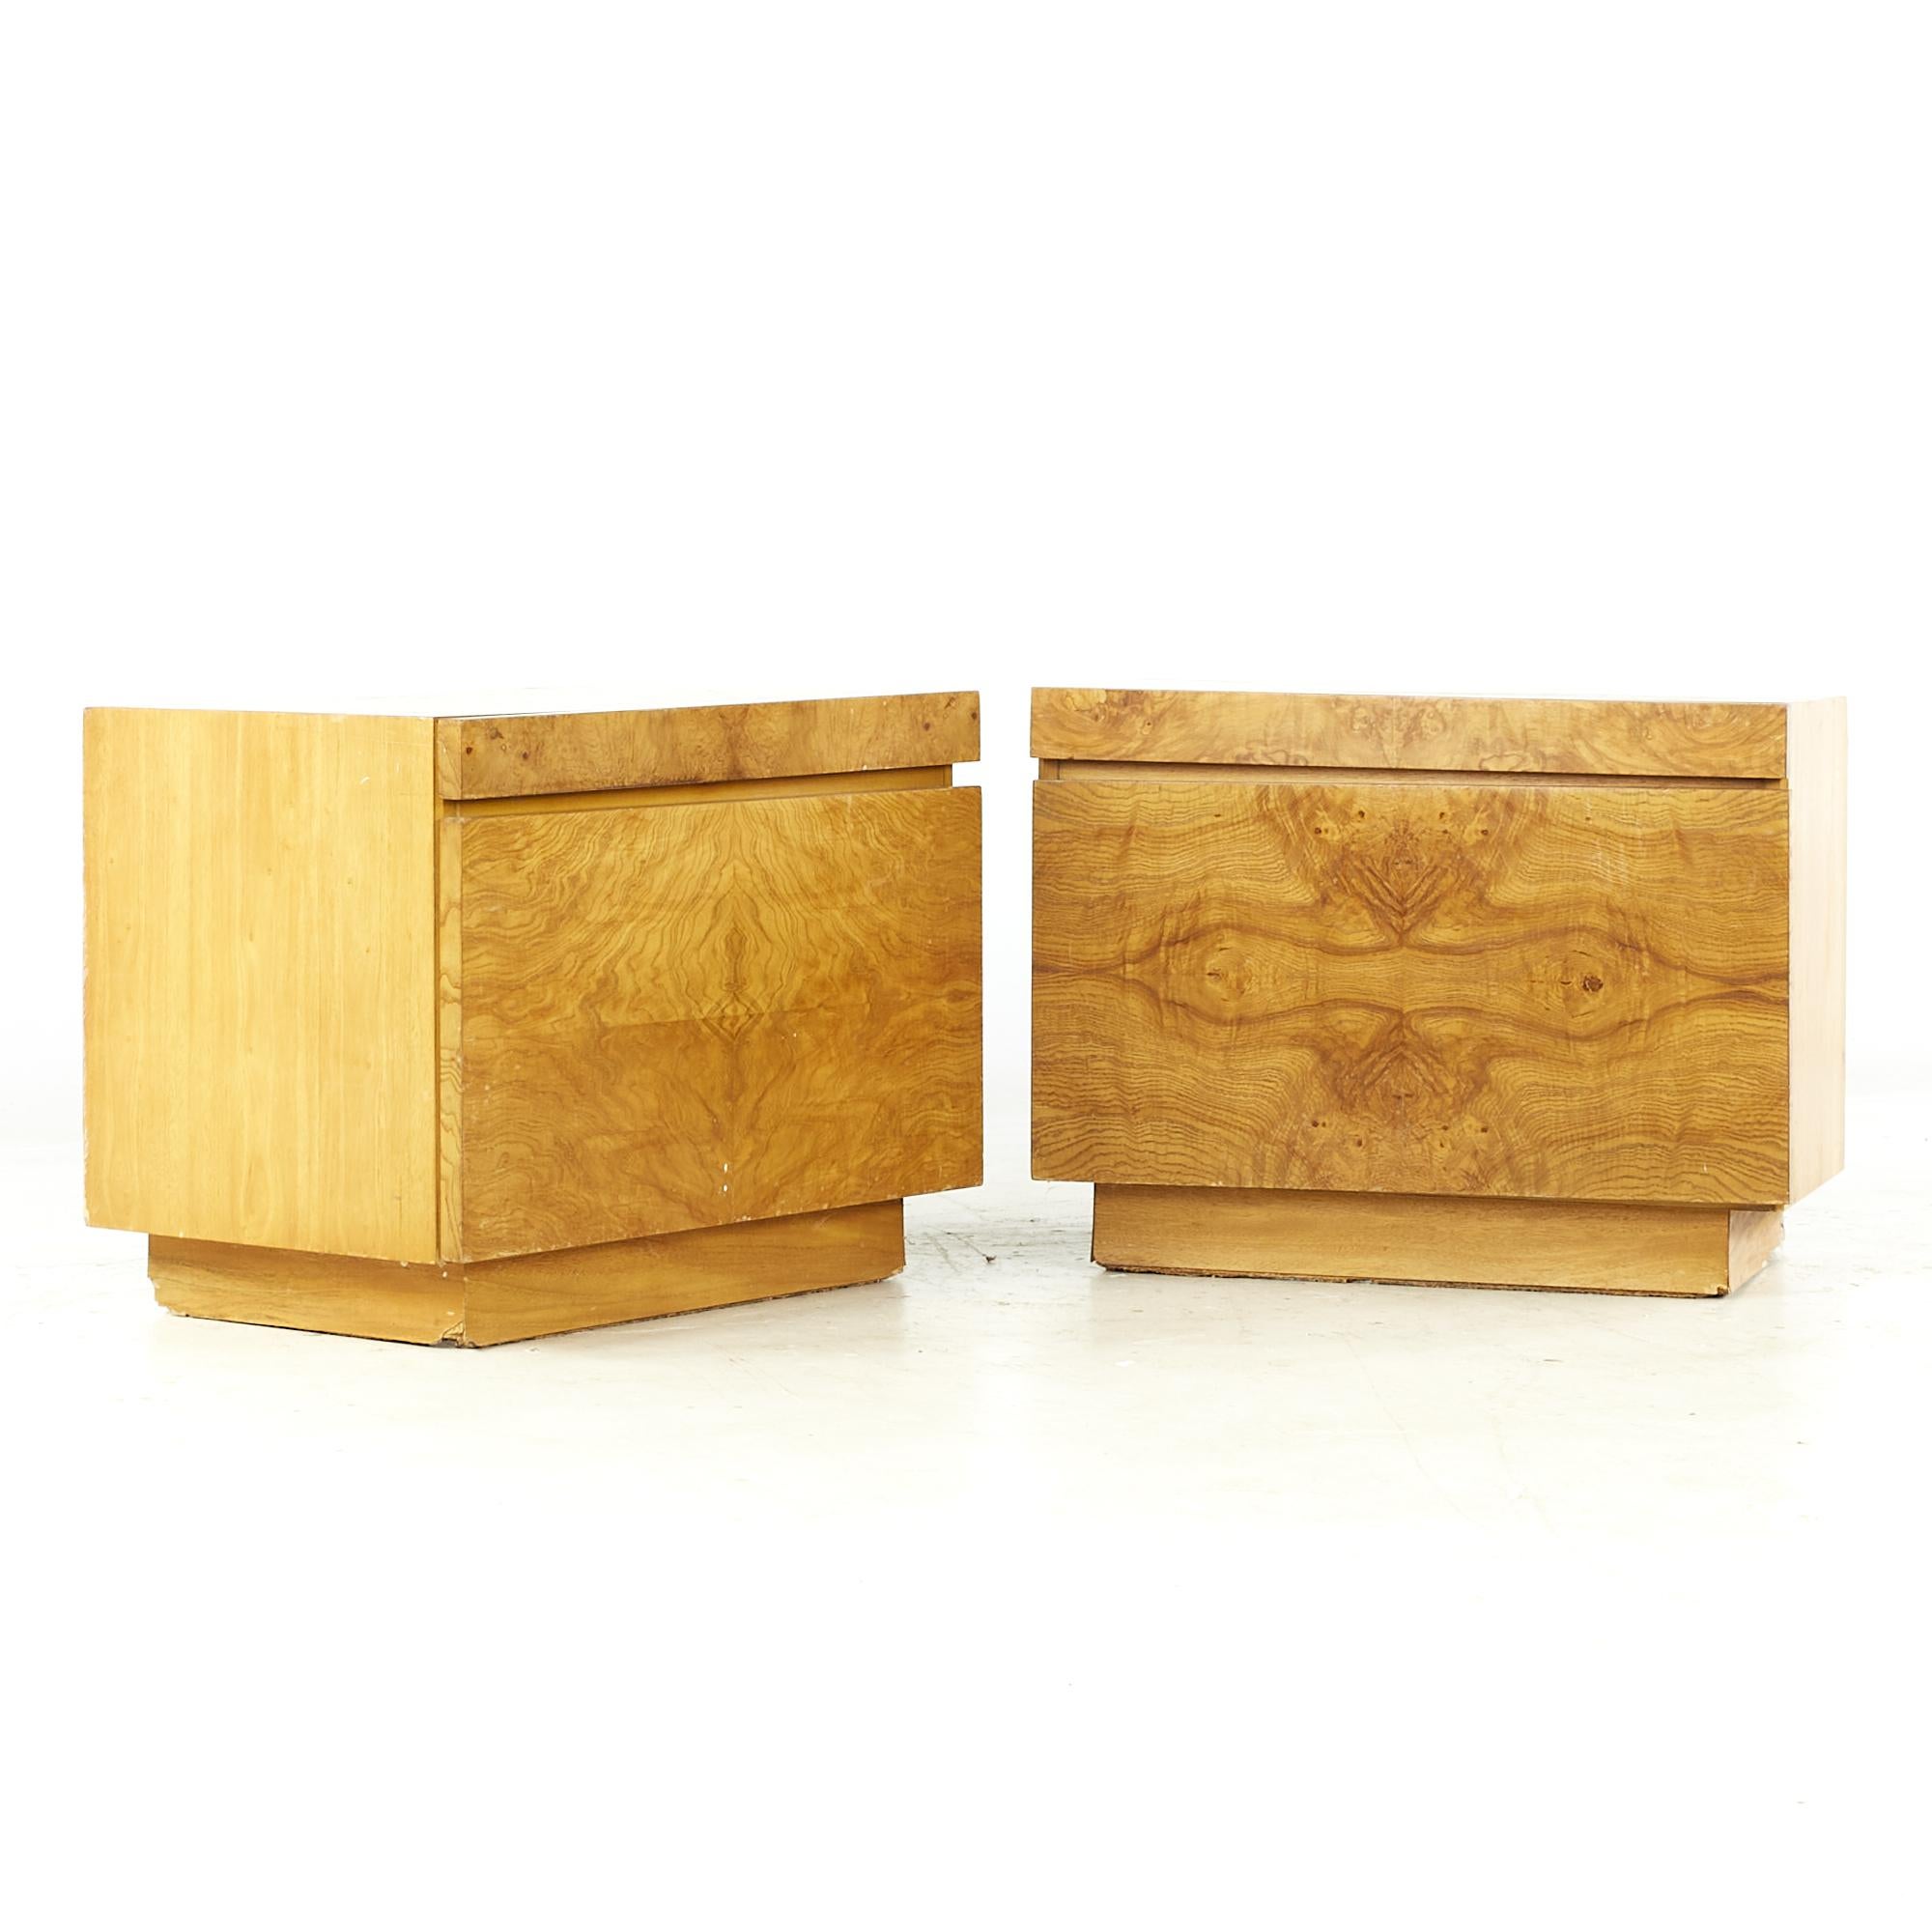 Milo Baughman Style Lane midcentury Burlwood Nightstands - Pair

Each nightstand measures: 26 wide x 17 deep x 20.25 inches high

All pieces of furniture can be had in what we call restored vintage condition. That means the piece is restored